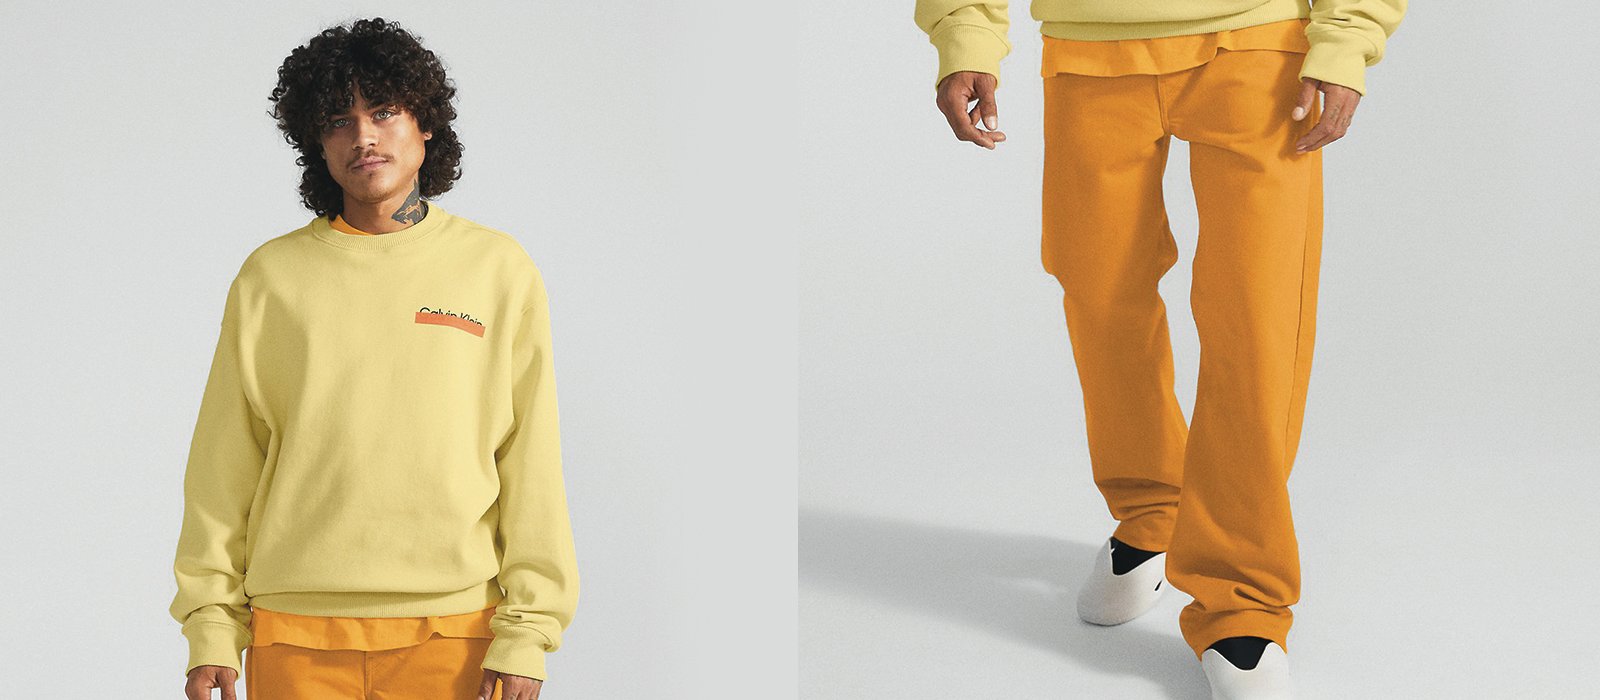 Does Heron Preston for Calvin Klein stand on its promises? Find out here!